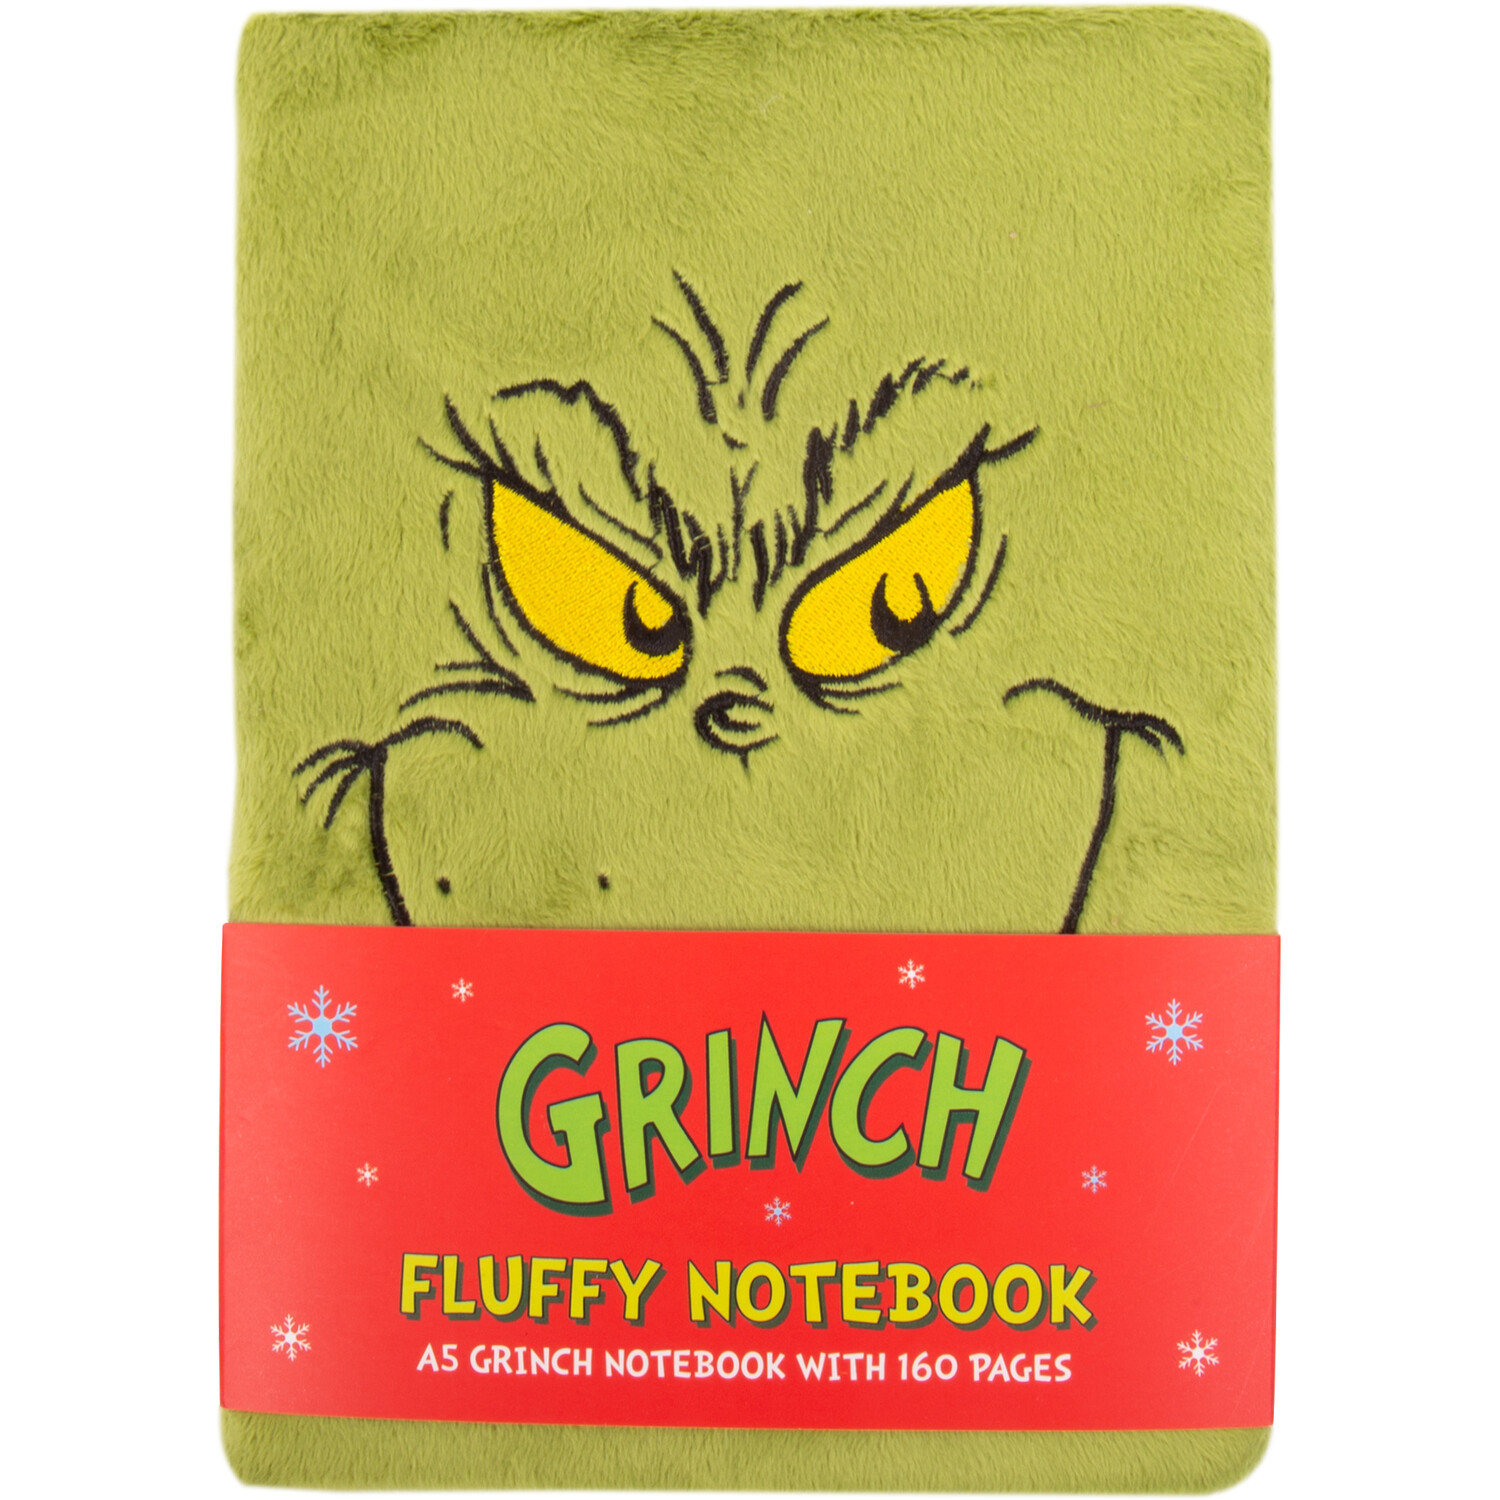 The Grinch Fluffy Notebook - Green Image 1